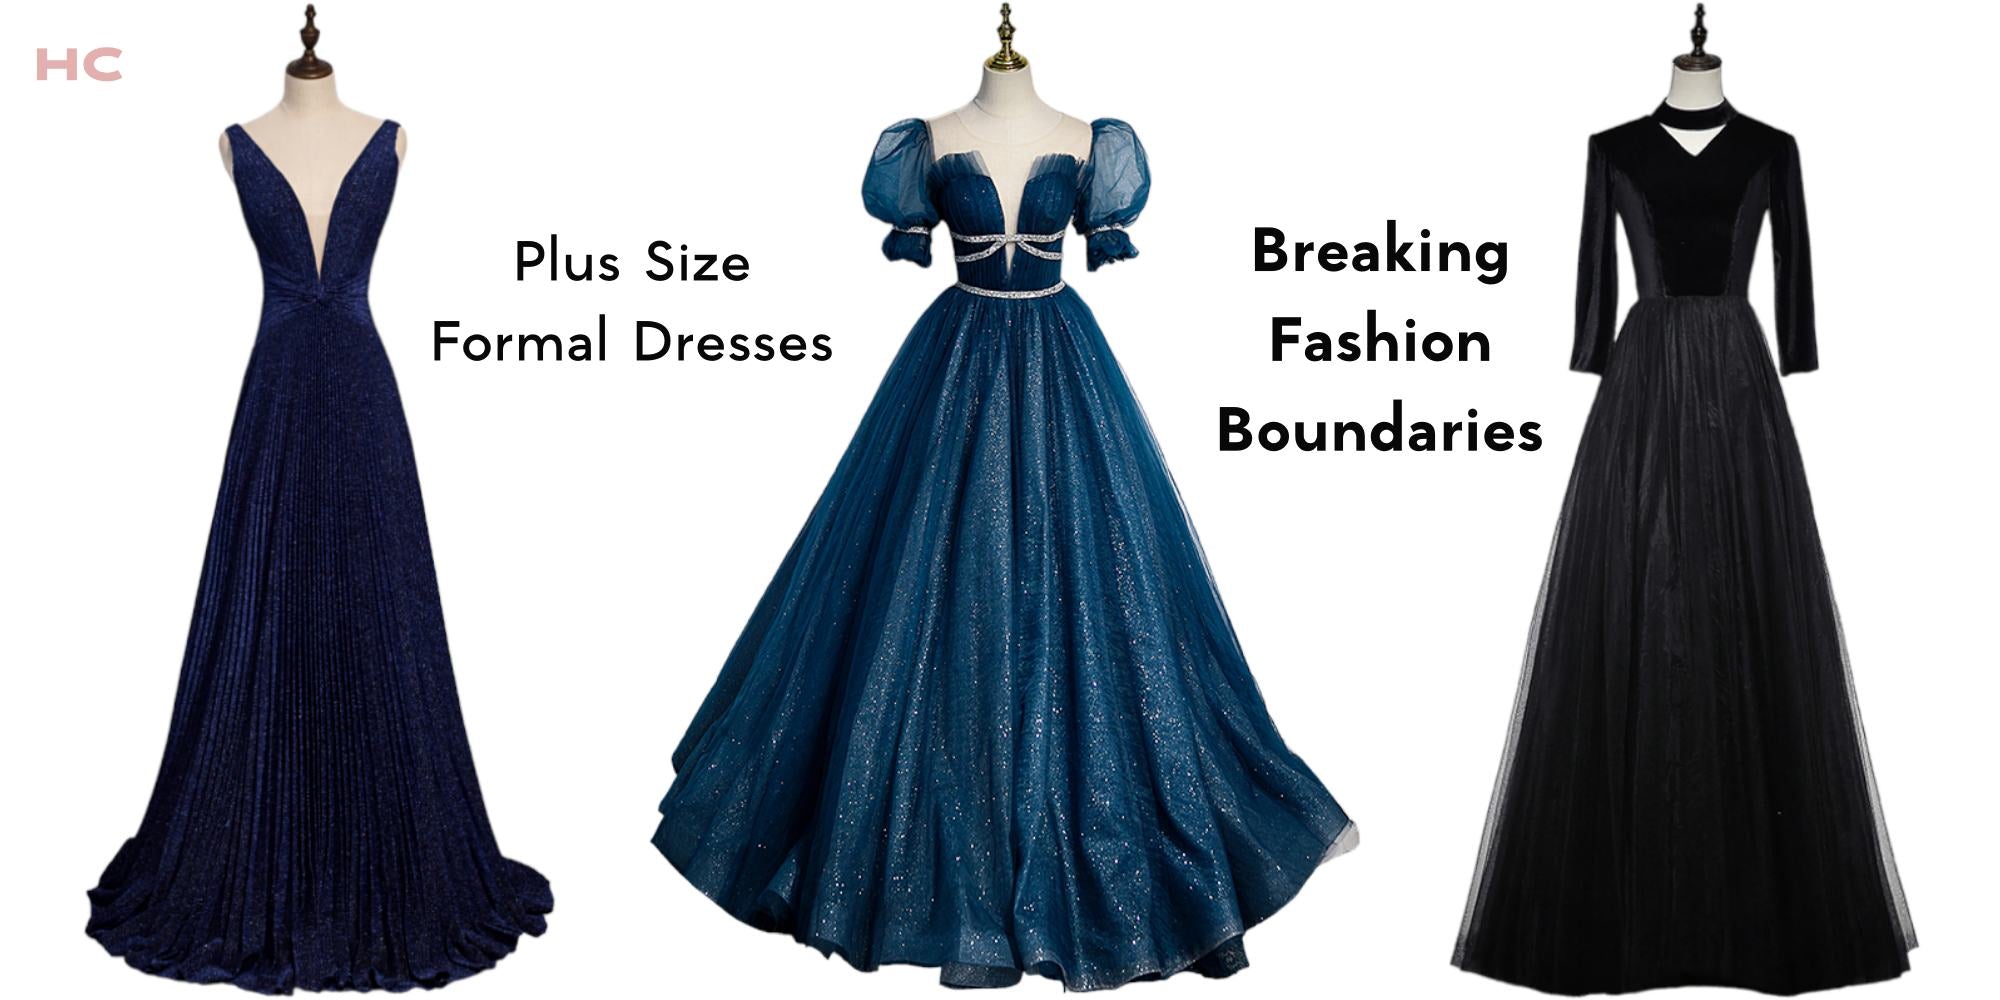 Plus Size Formal Dresses Breaking Fashion Boundaries: A Revolution of Style and Inclusivity